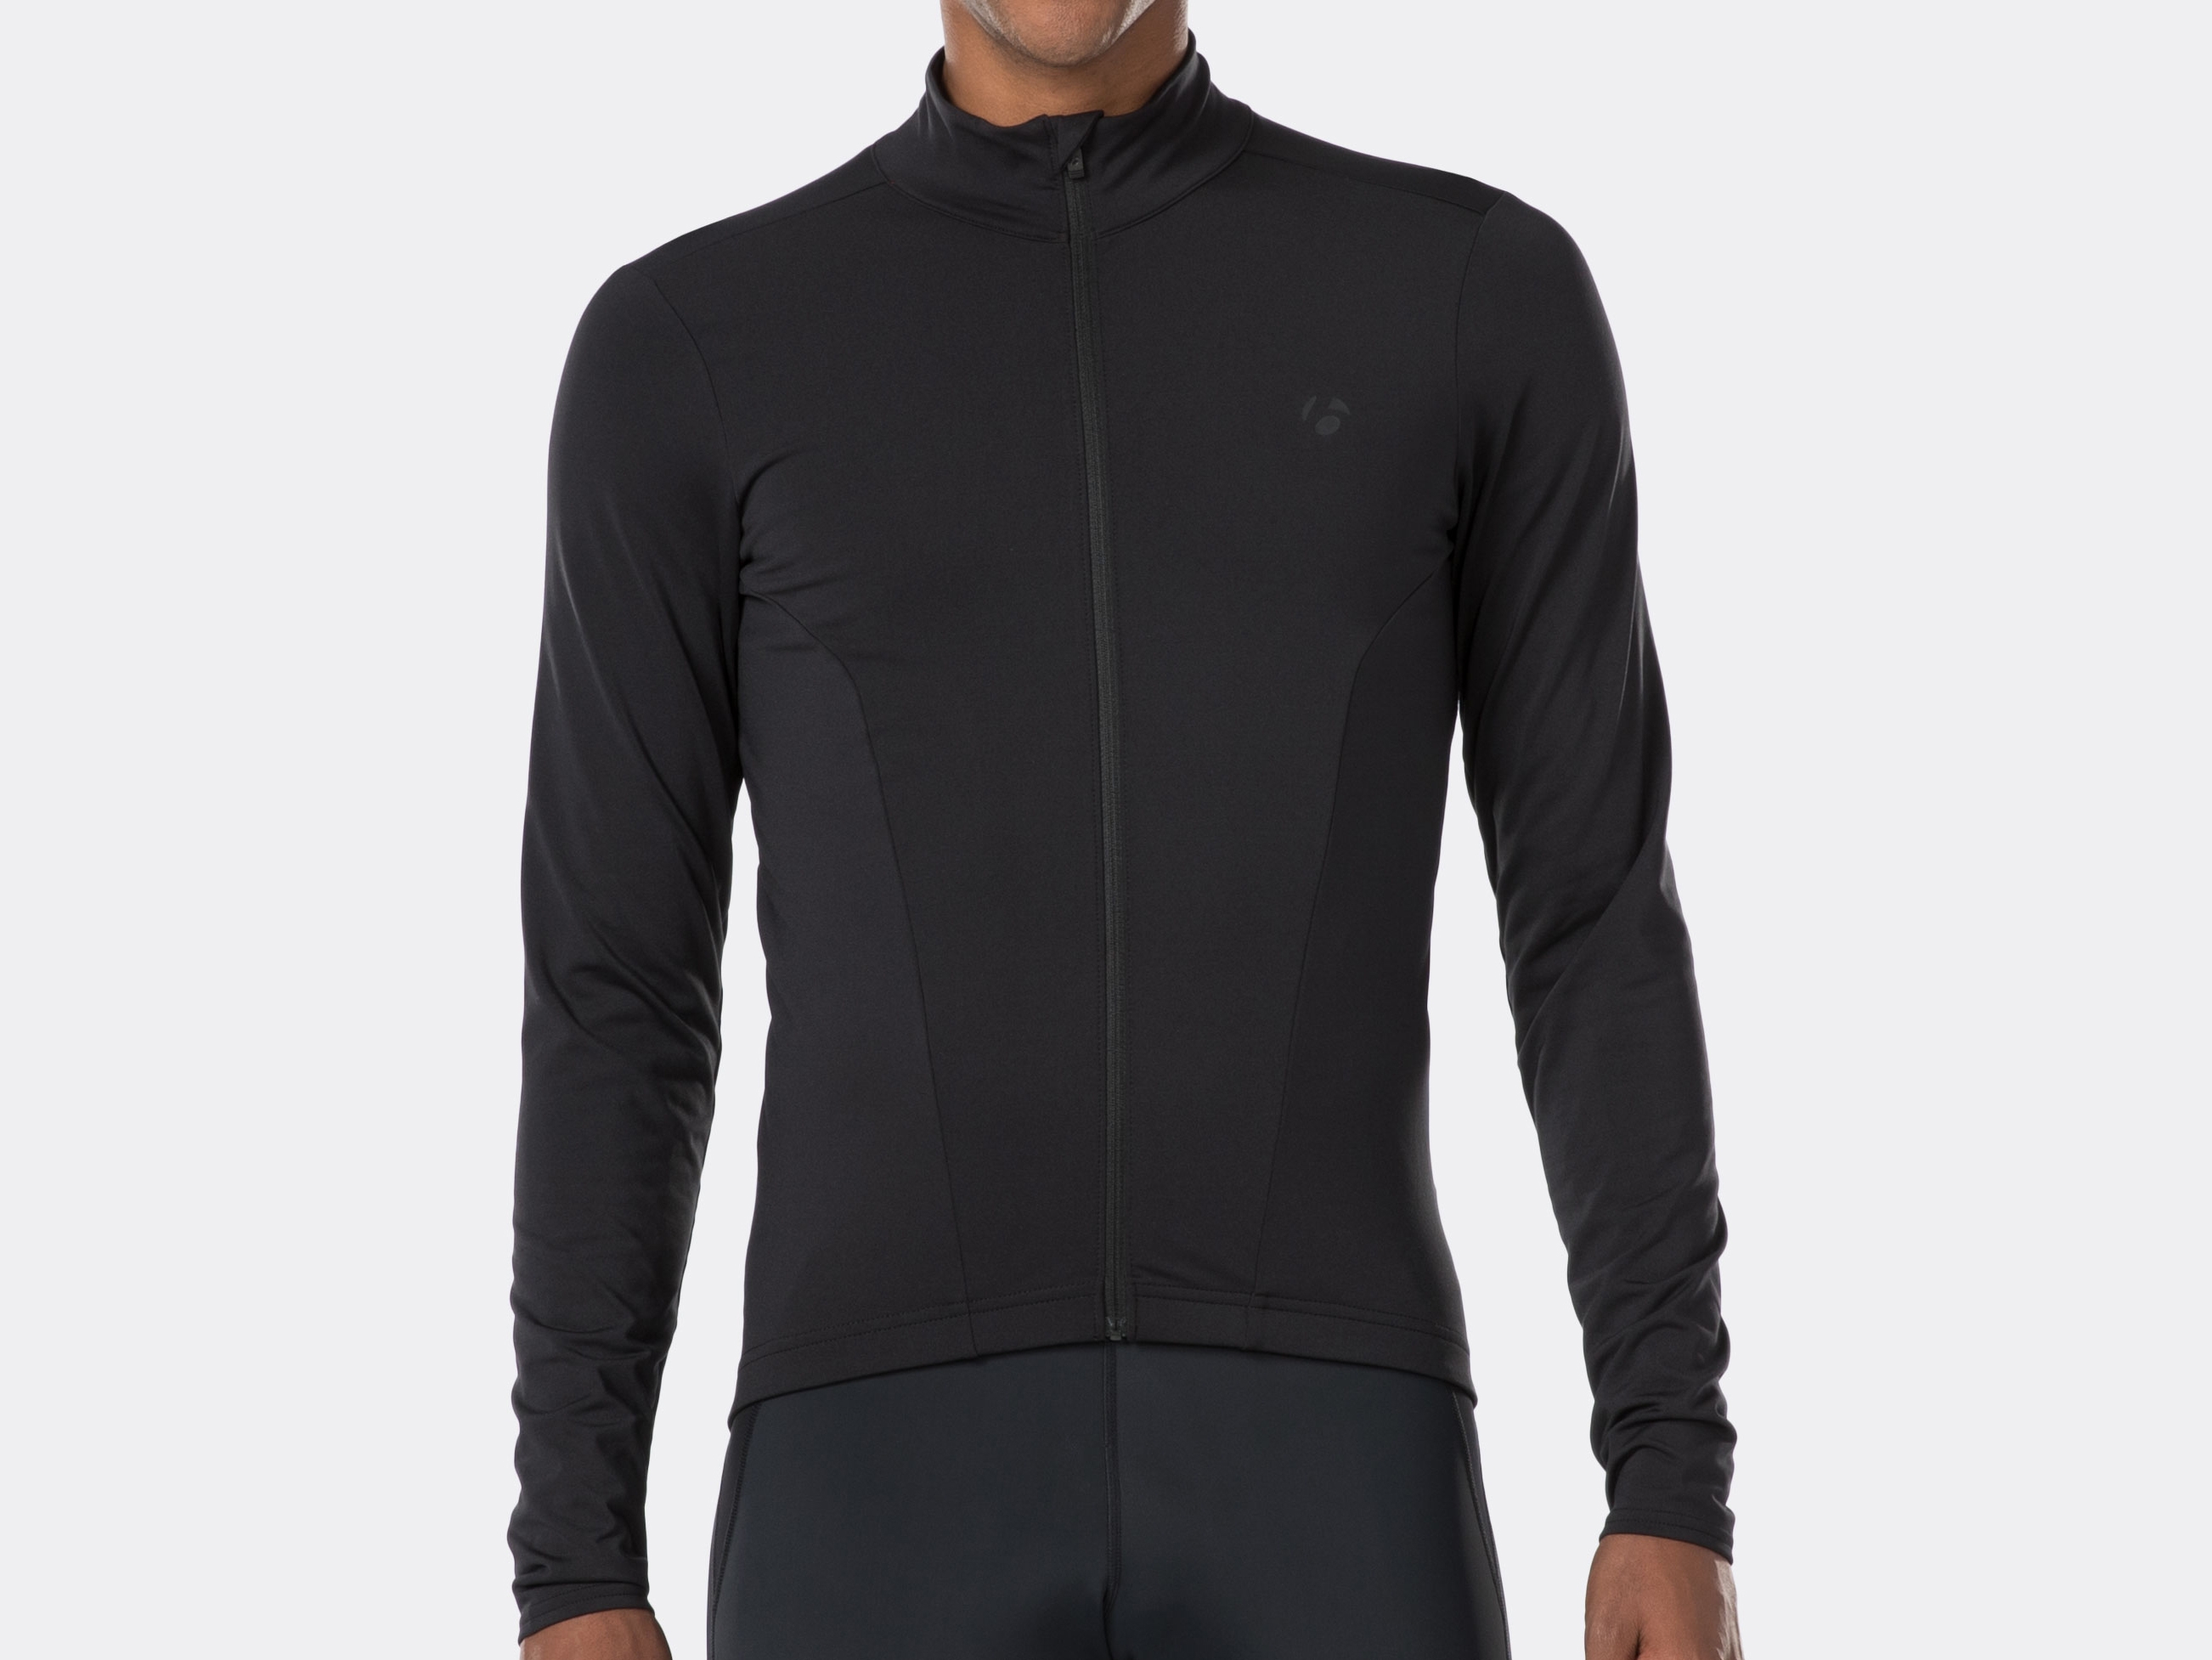 cycling thermal jersey